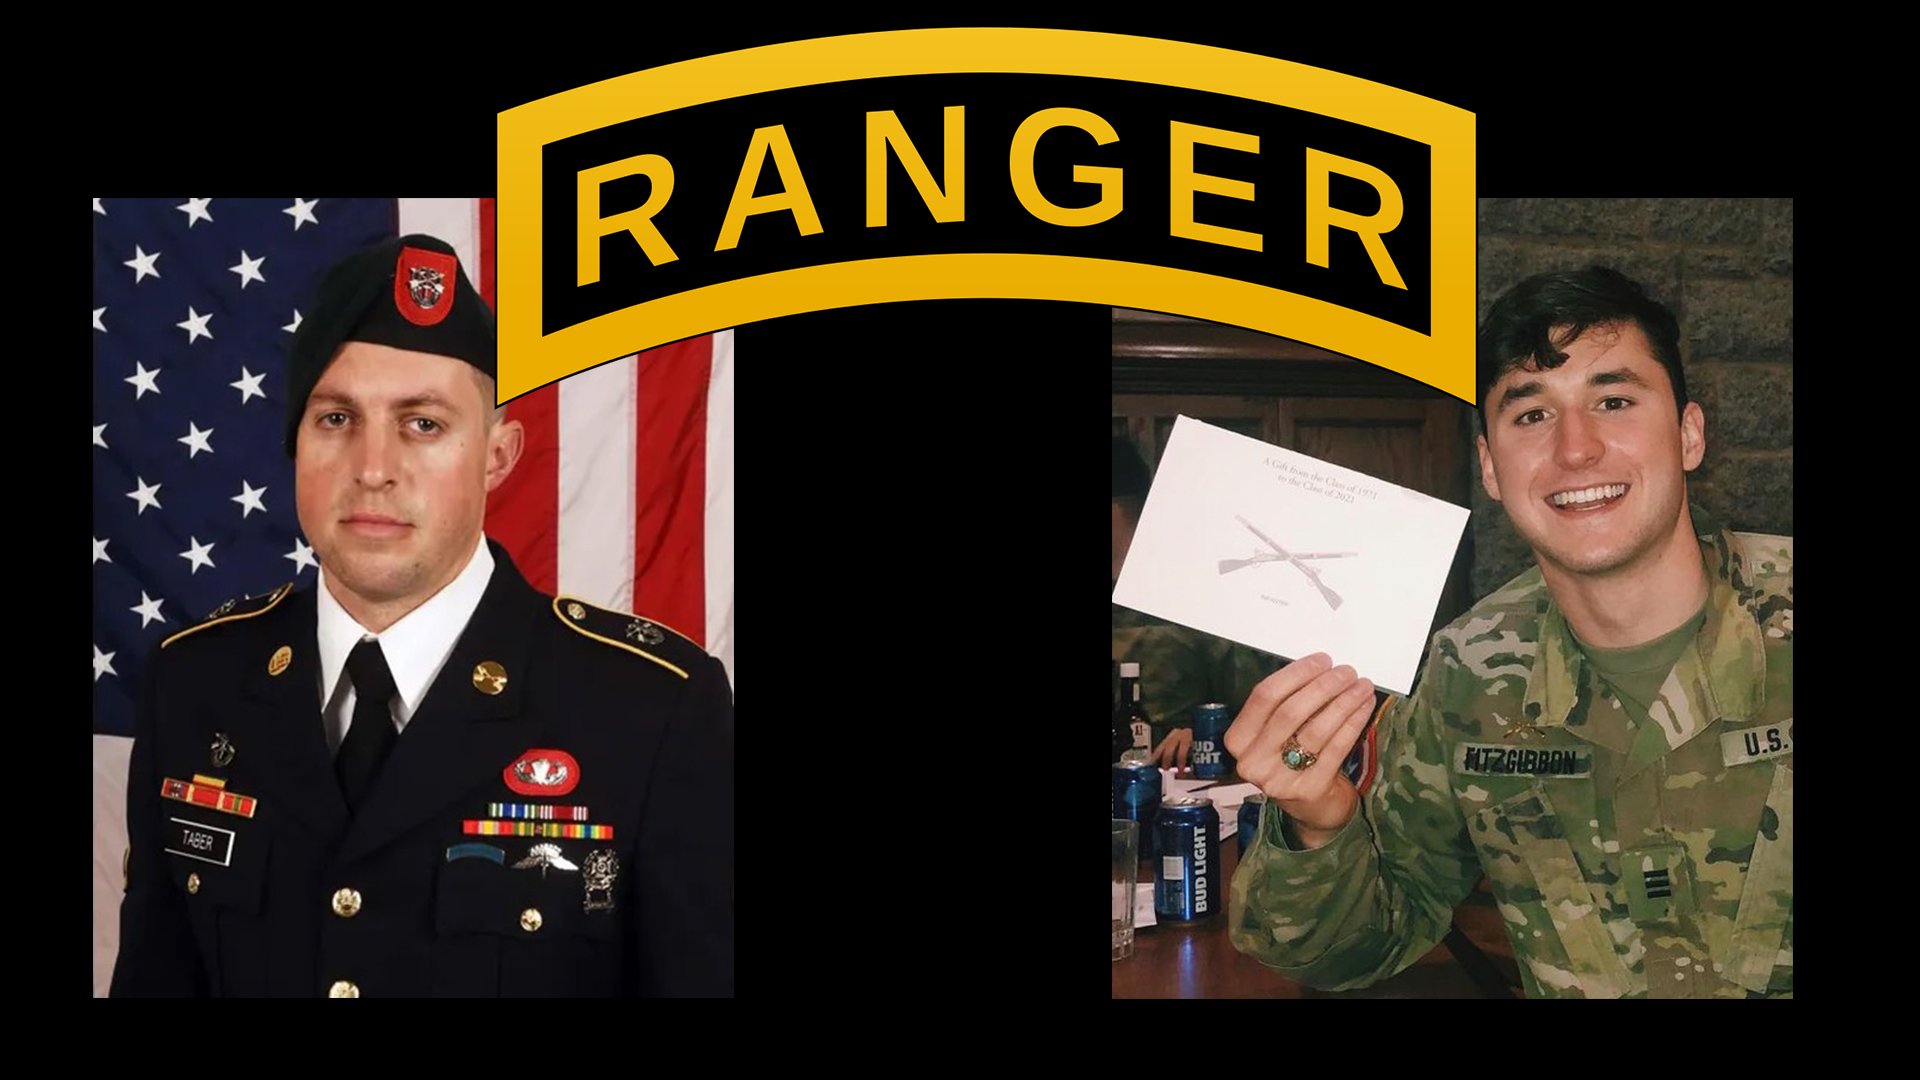 The Army said Staff Sgt. George Taber and 2nd Lt. Evan Fitzgibbon were both killed when a tree fell on them during a windstorm at Yonah Mountain near Dahlonega, Georgia, the home of Ranger School's Mountain Phase. Composite by Coffee or Die Magazine.